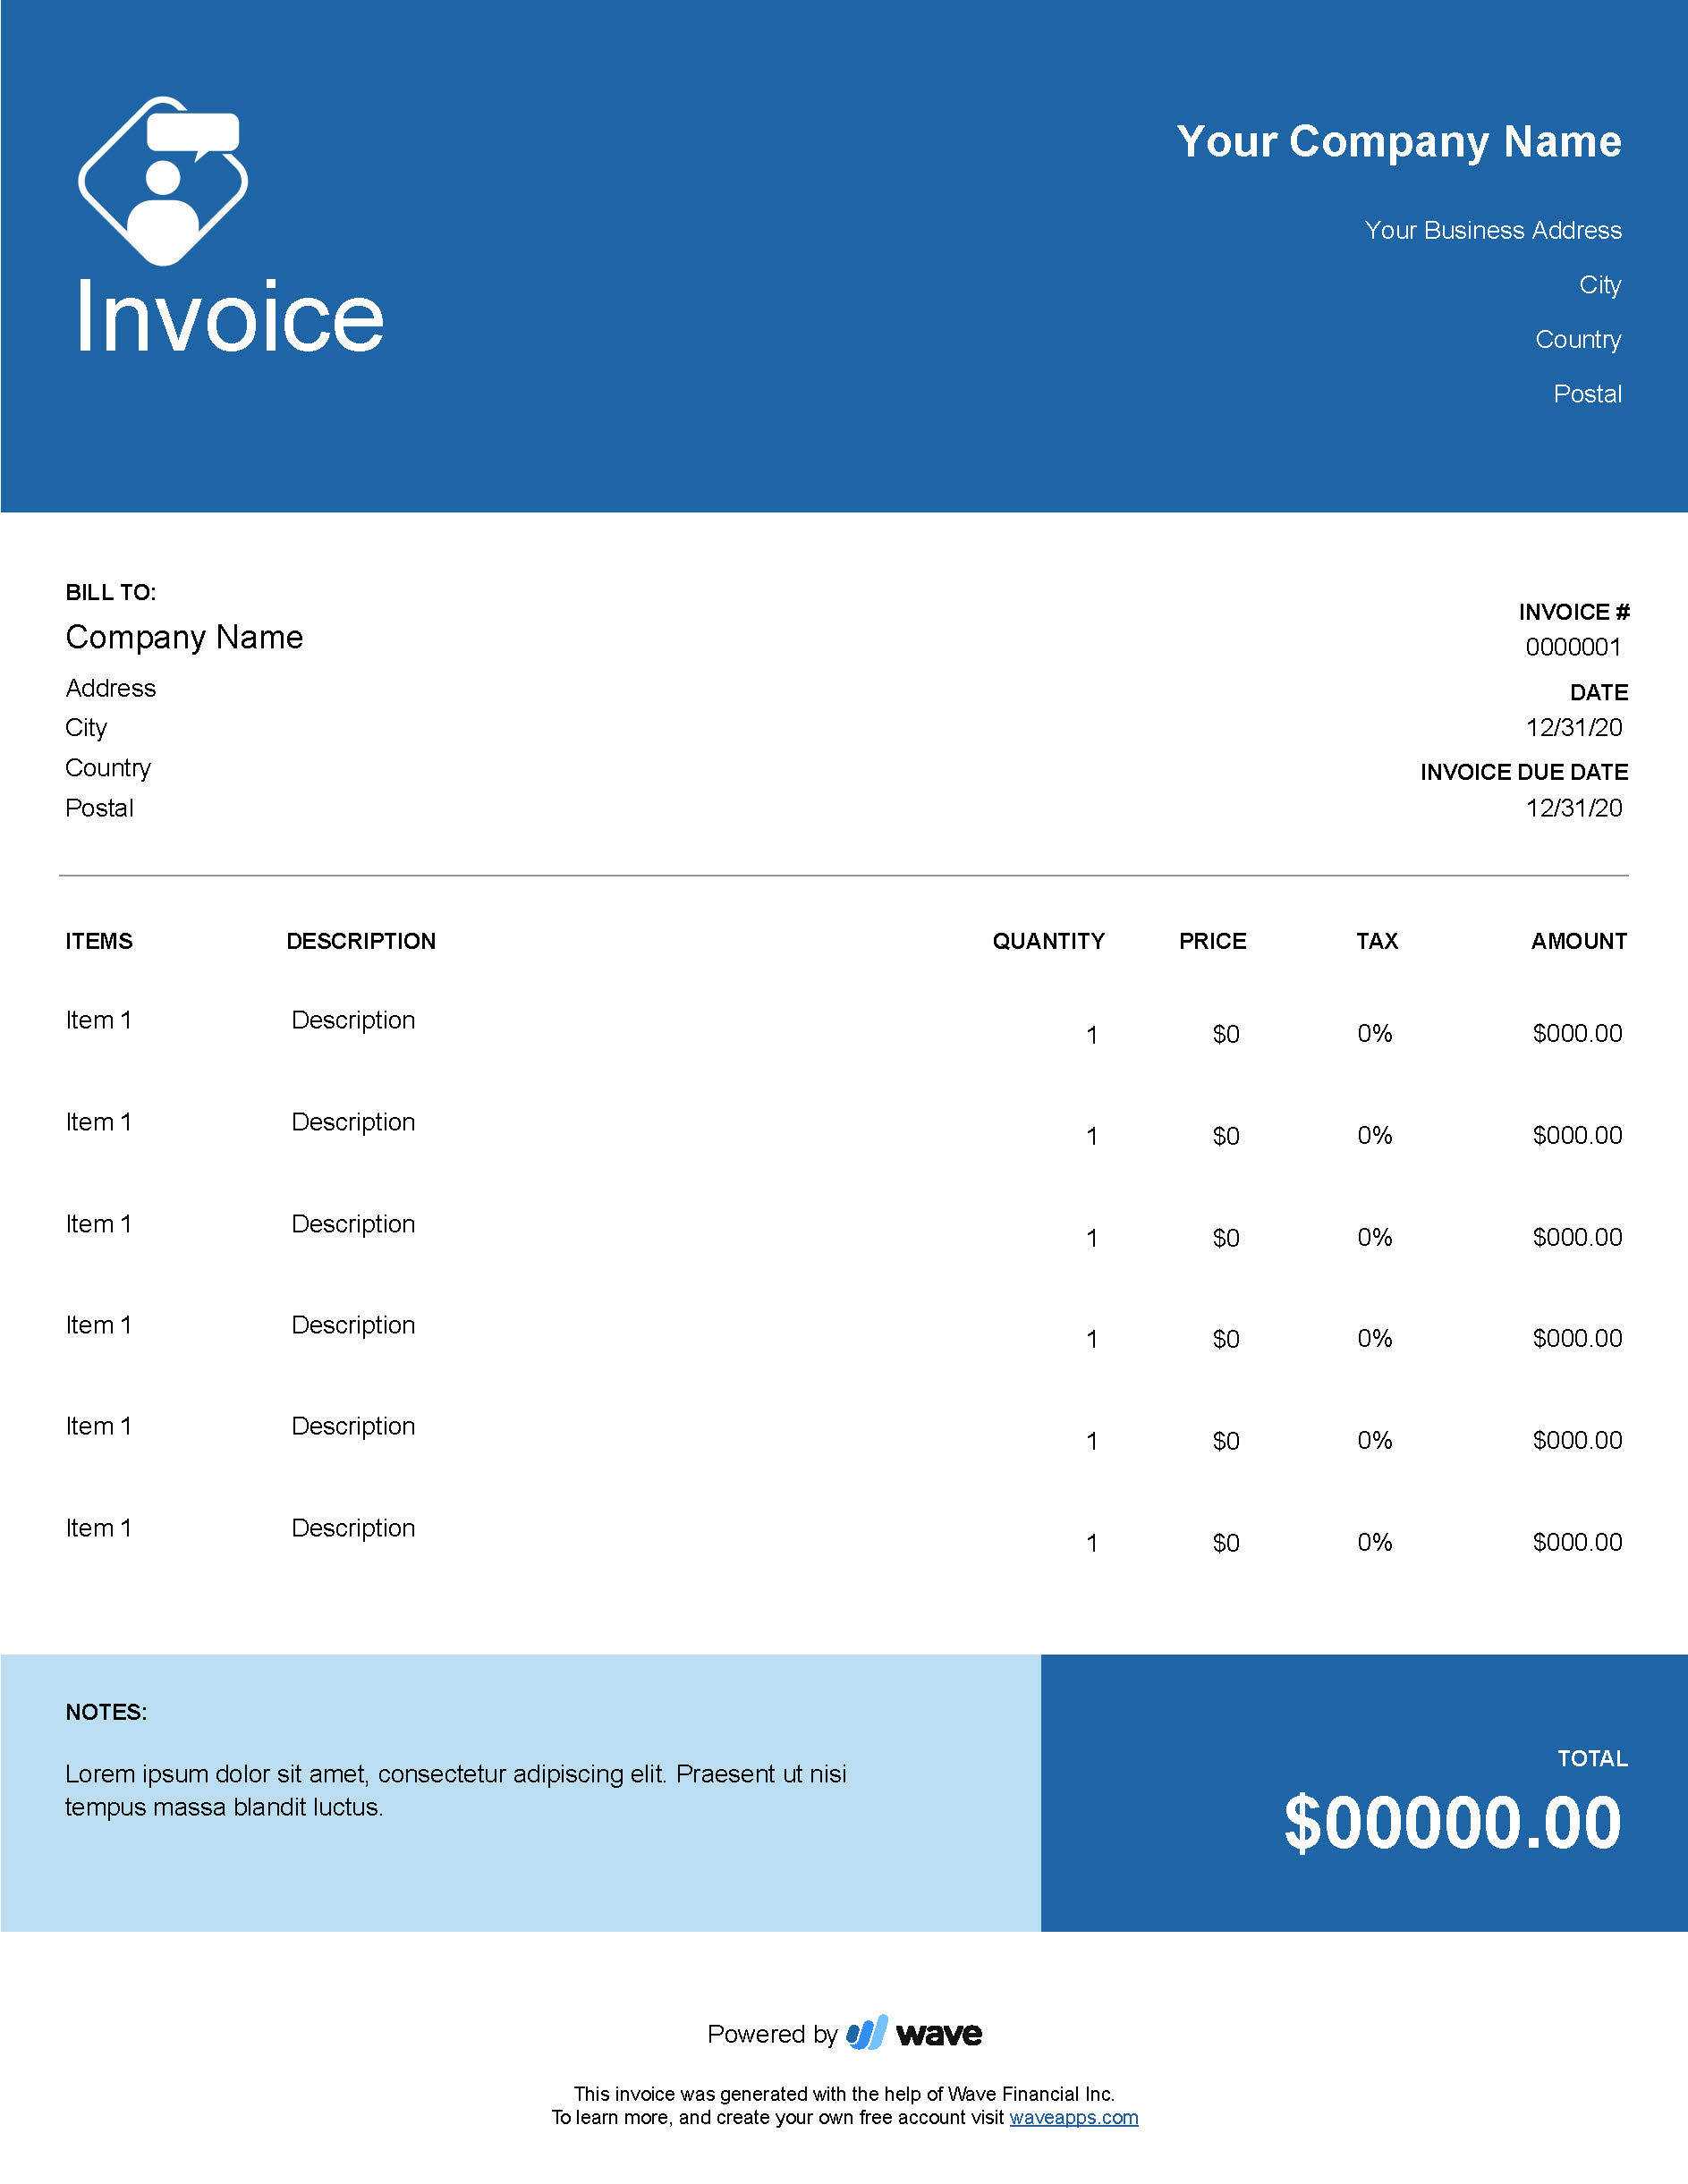 Consulting Invoice Template – Wave Financial Pertaining To Invoice Template Word 2010